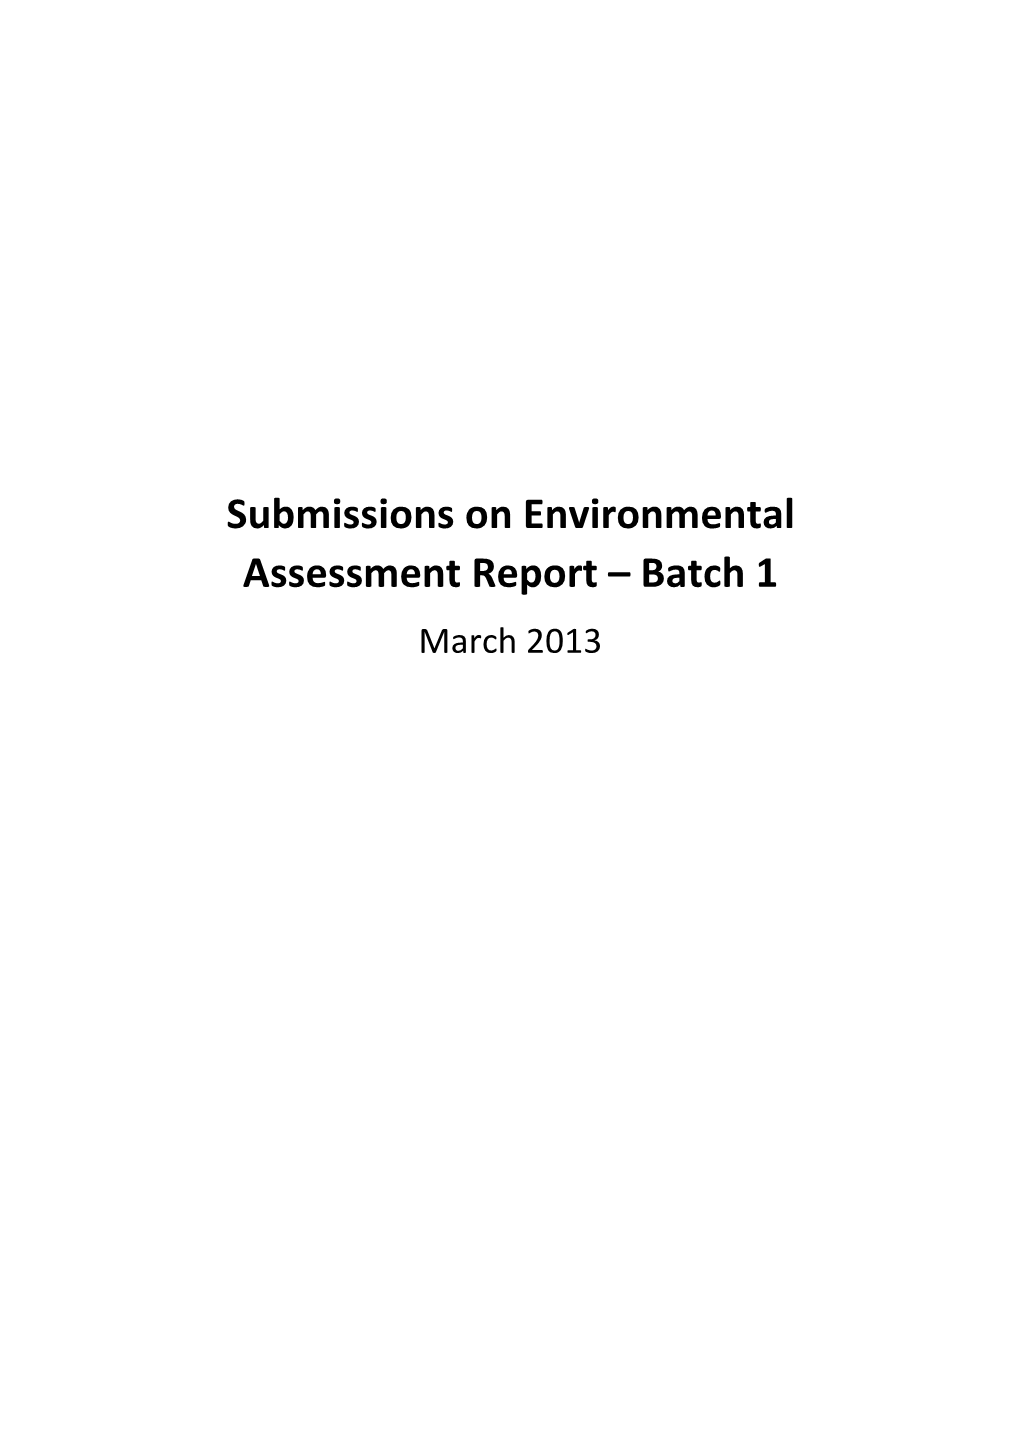 Submissions on Environmental Assessment Report